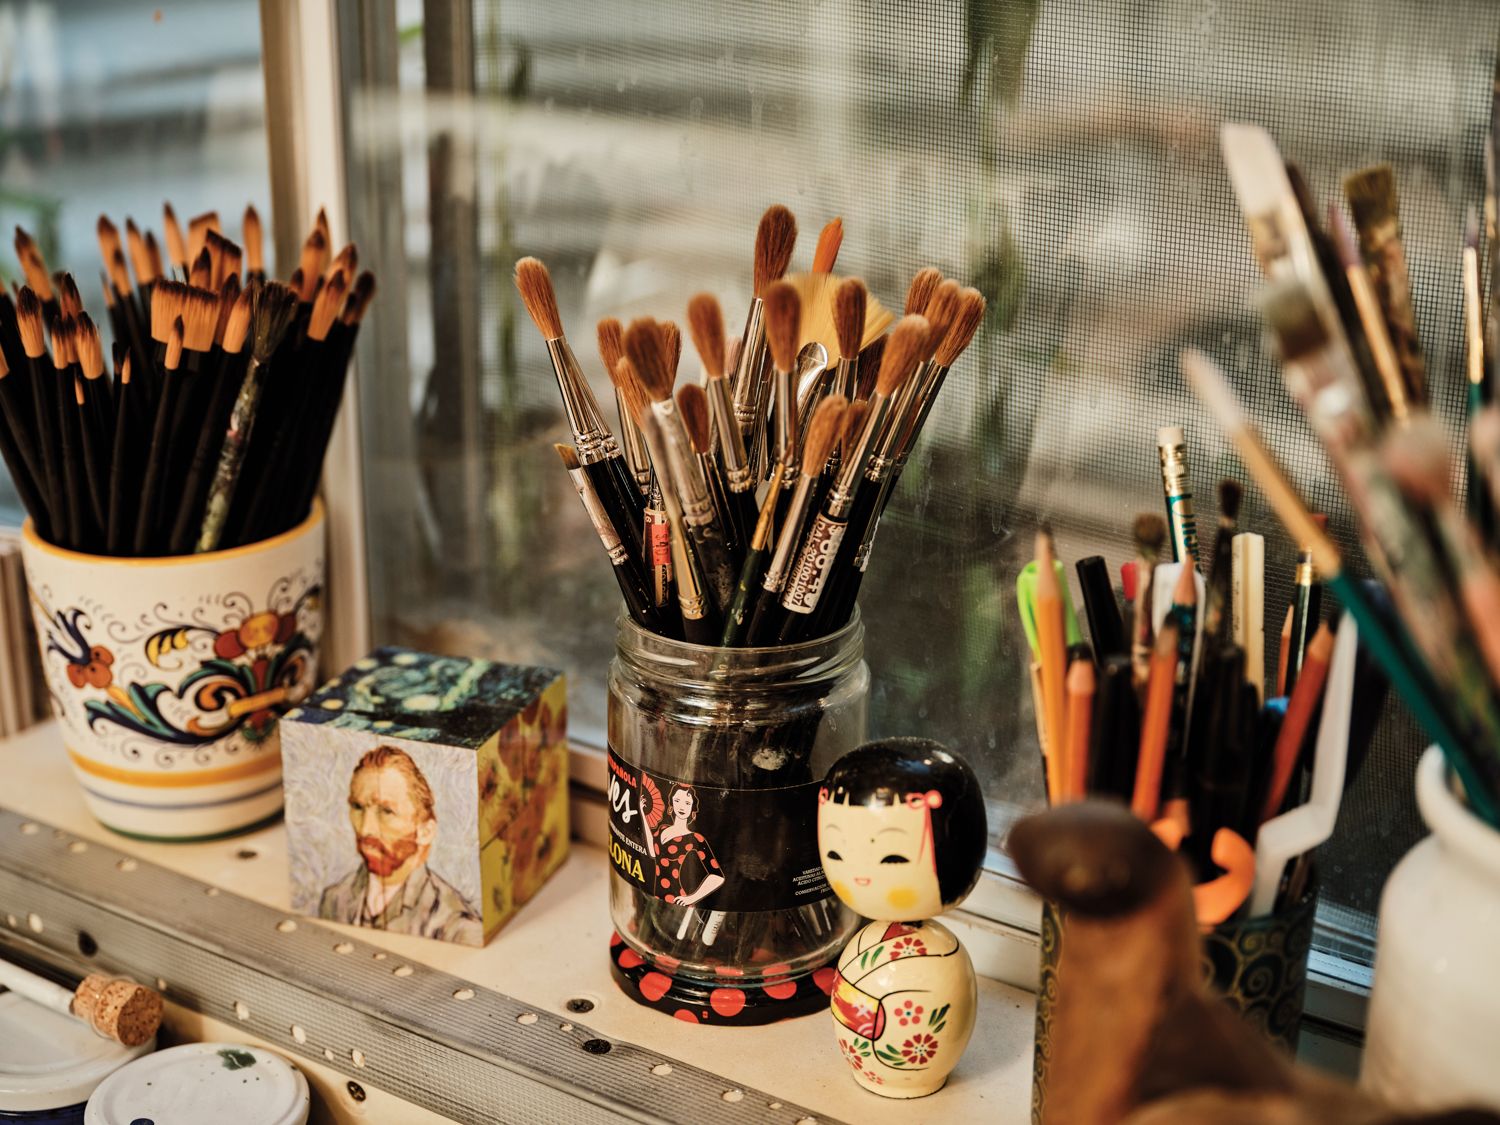 vignette of paintbrushes in jars and cups with figurines alongside